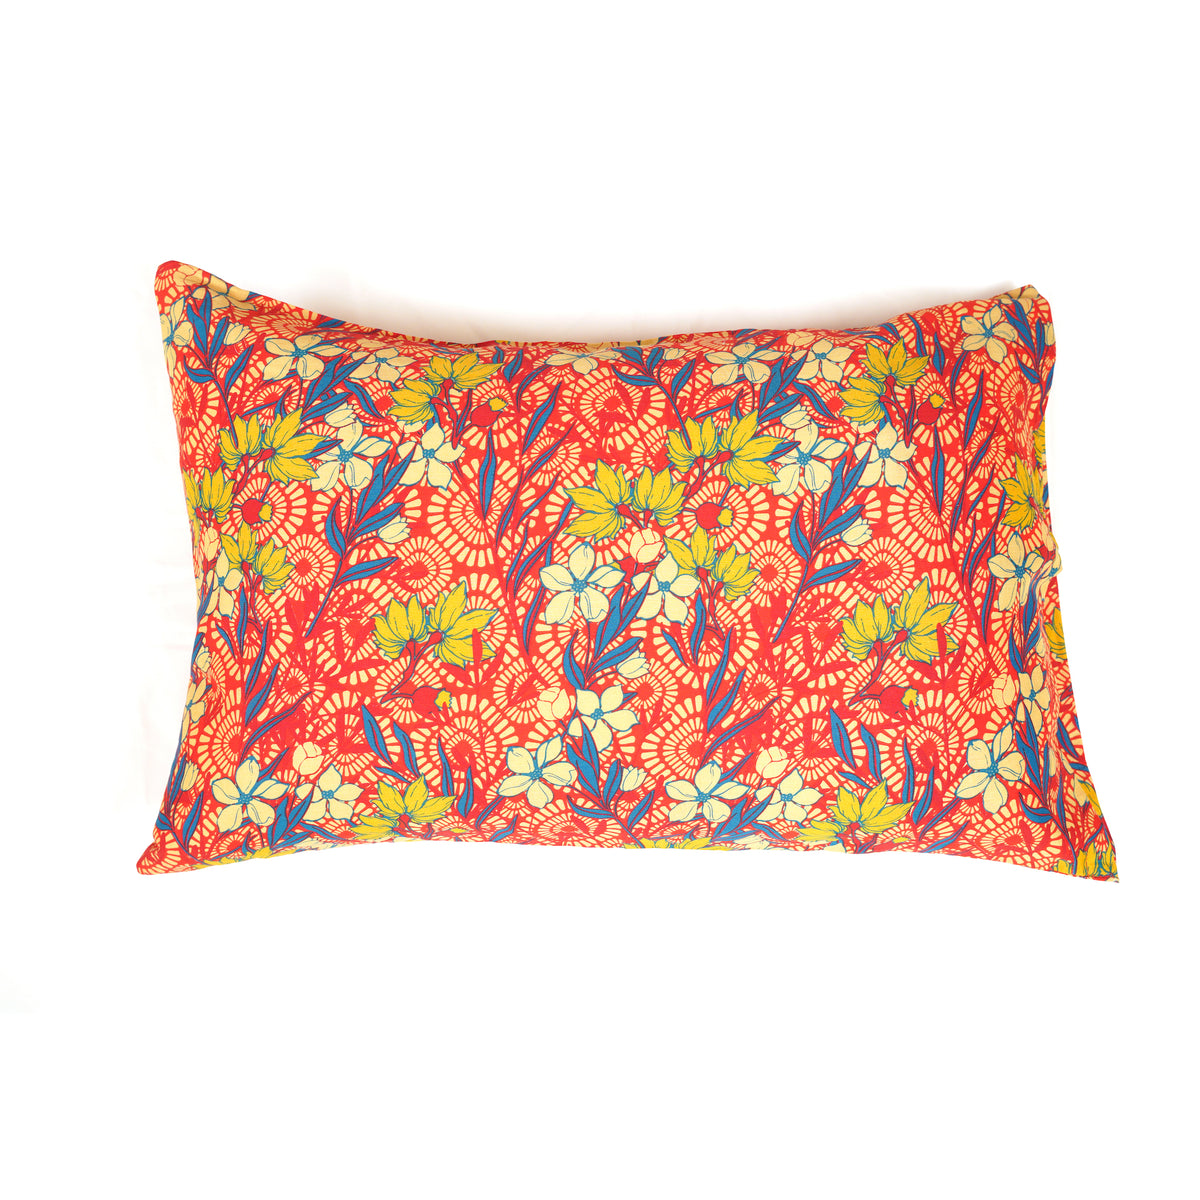 Pillow Cover - Scarlet Blossom